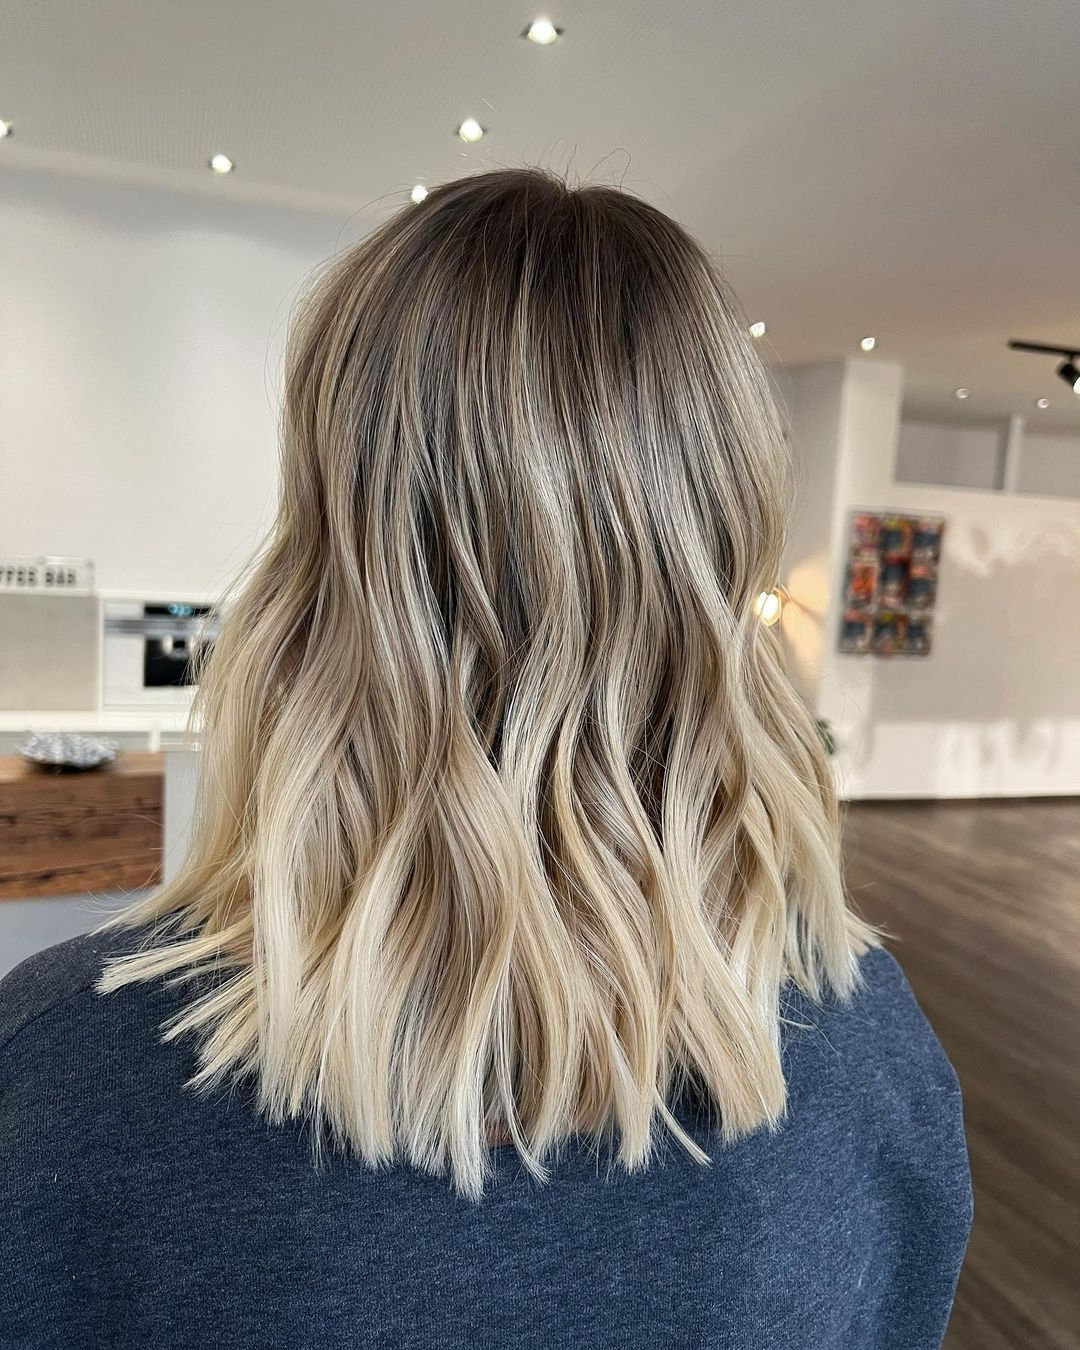 Here’s a list of all the coolest short hairstyles Trending Now we’be seen thus far. Regardless of your hair type, you’ll find here lots of superb short hairdos, including short wavy hairstyles, natural hairstyles for short hair, and short hairstyles for thick or fine hair. 